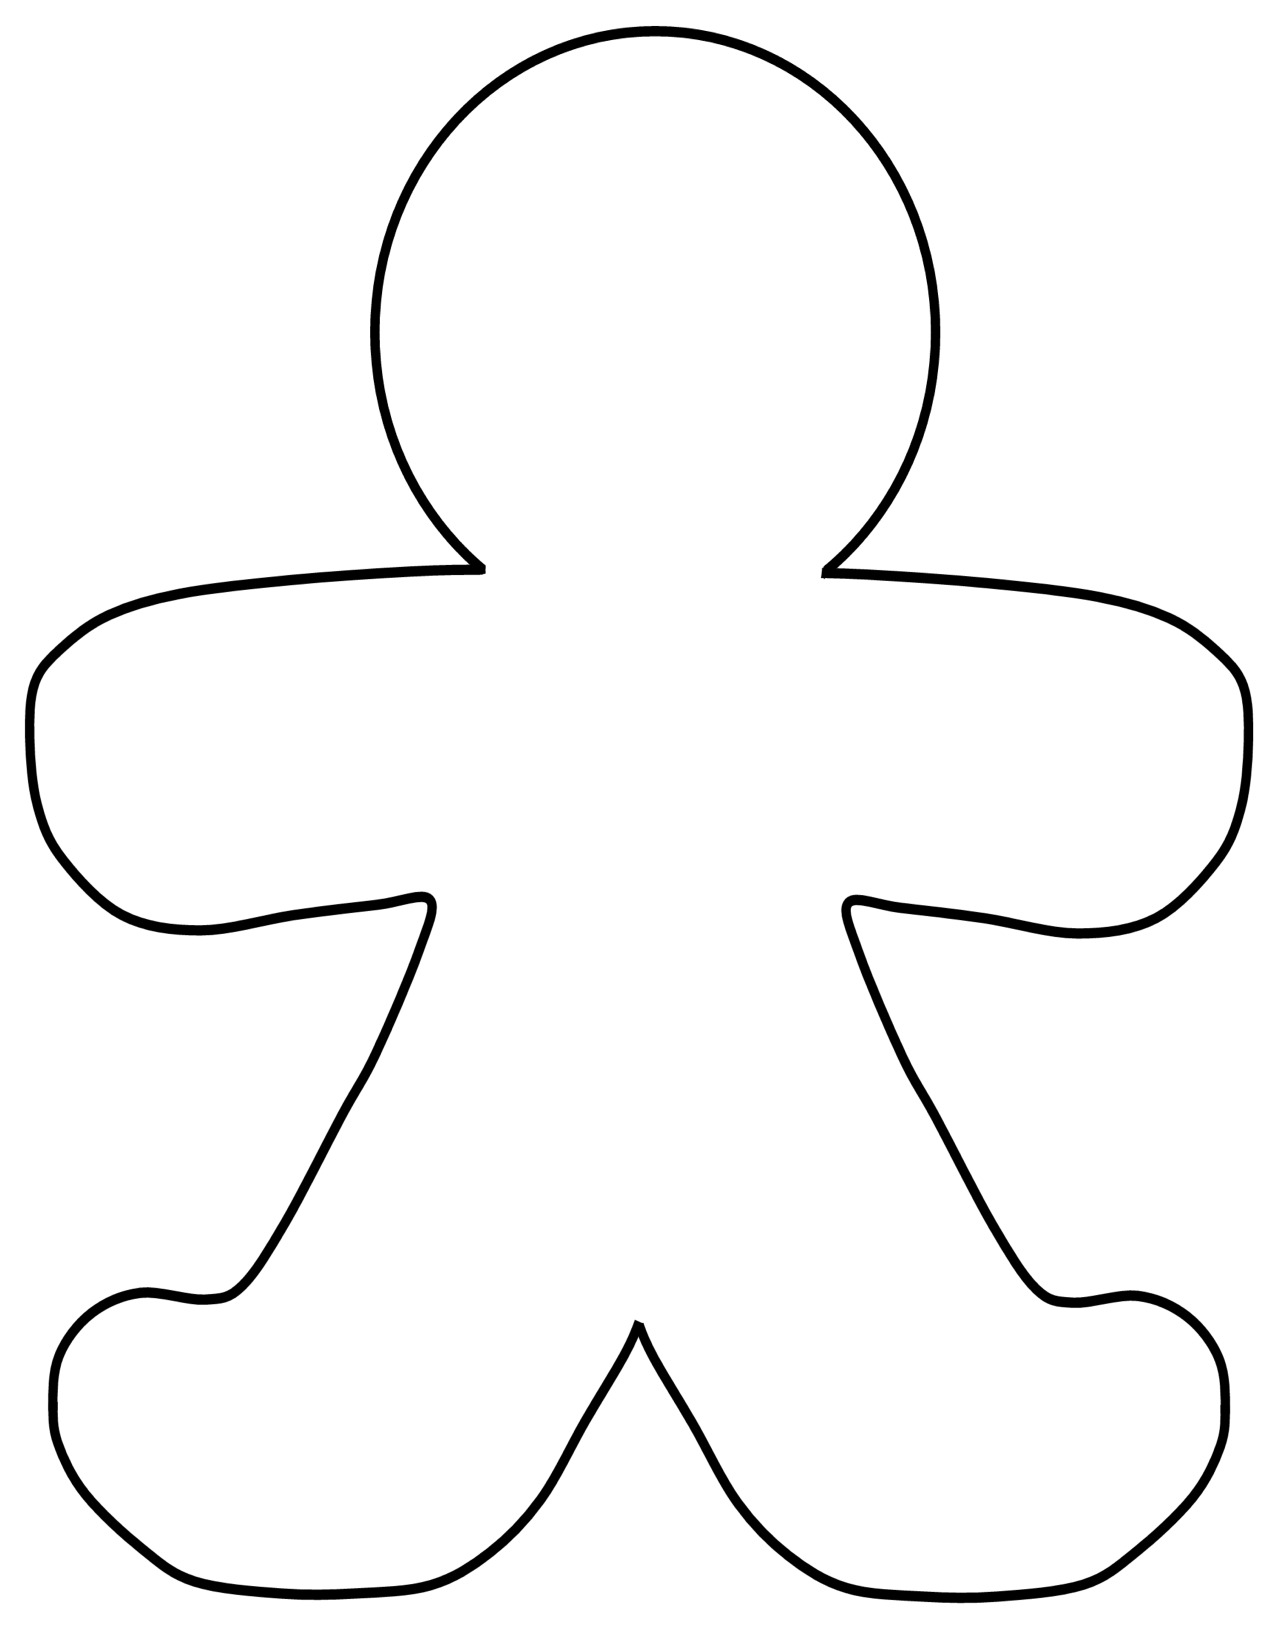 Gingerbread-man-clipart-7 | Clipart Panda - Free Clipart Images